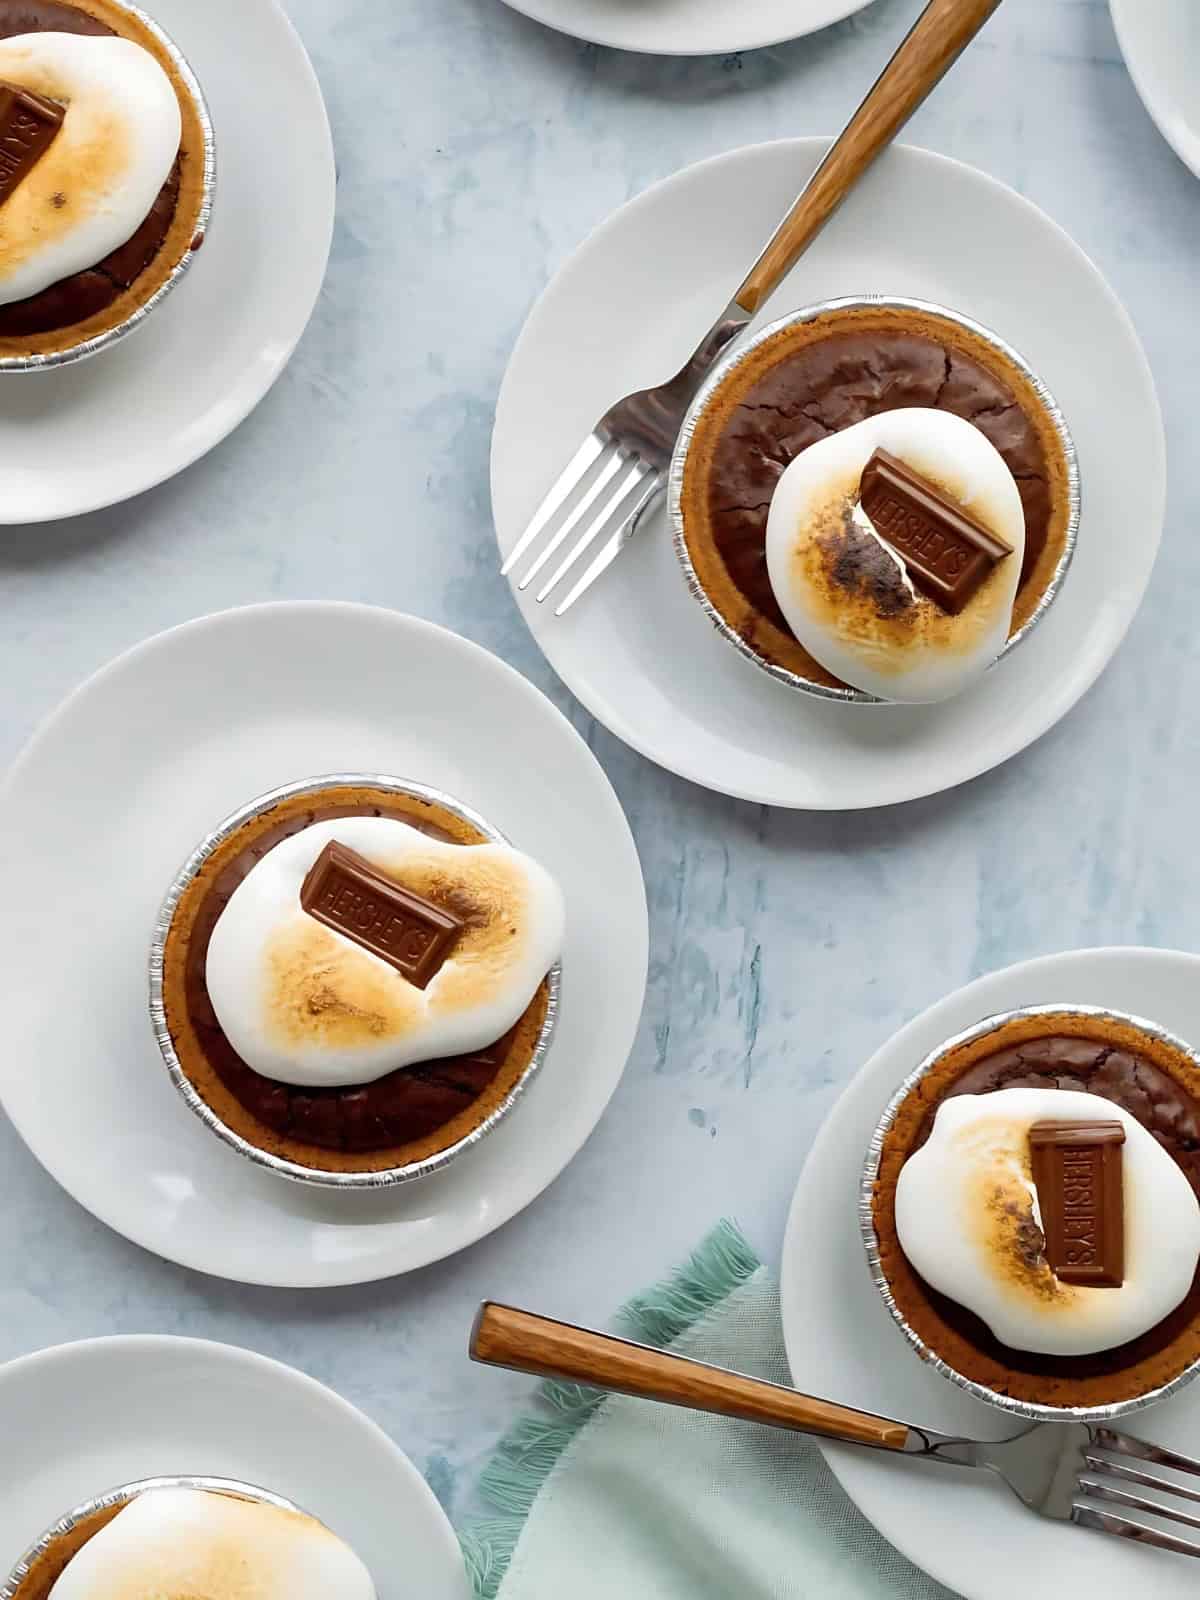 Mini Smores Pies on plates, topped with Hershey's chocolate bar.